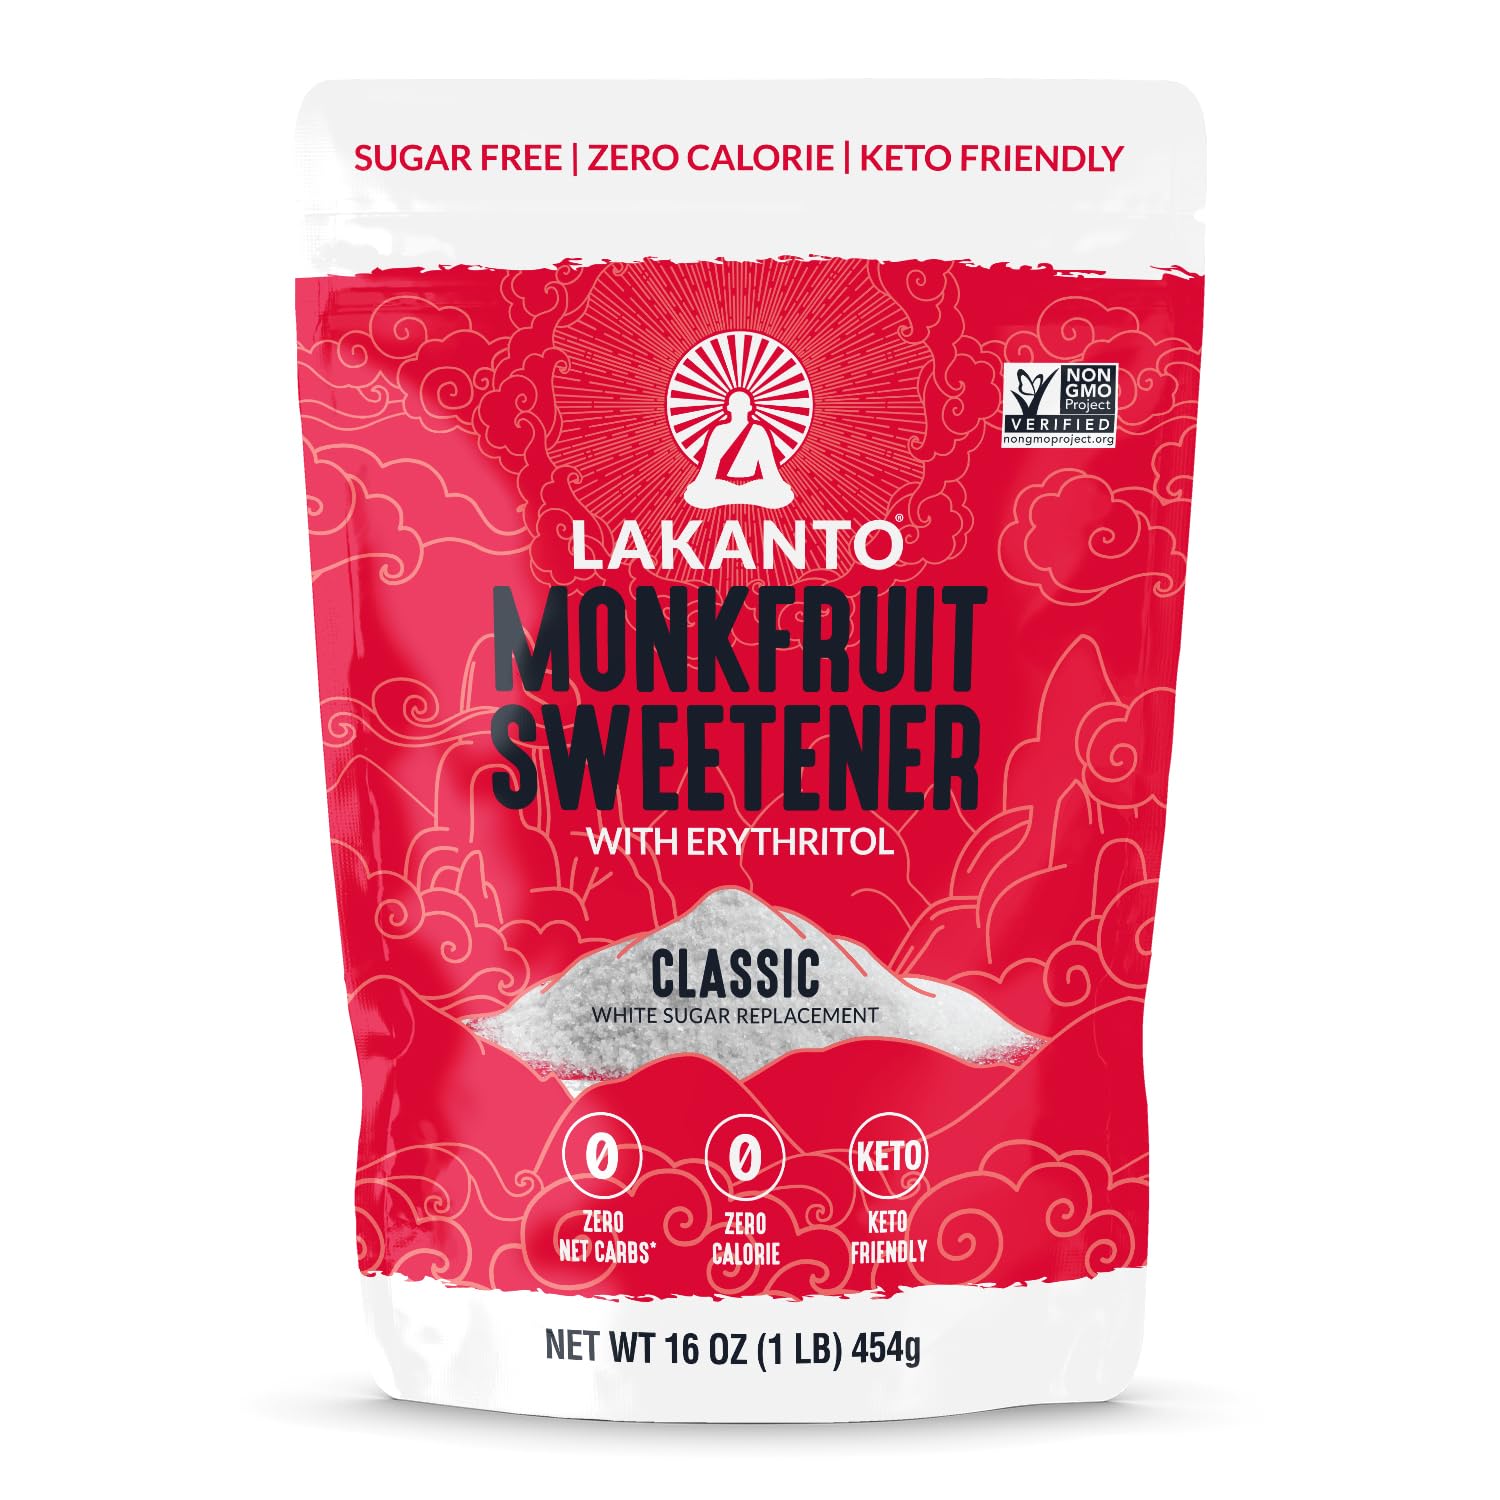 Lakanto Classic Monk Fruit Sweetener with Erythritol - White Sugar Substitute, Zero Calorie, Keto Diet Friendly, Zero Net Carbs, Baking, Extract, Sugar Replacement (Classic White - 1 lb)